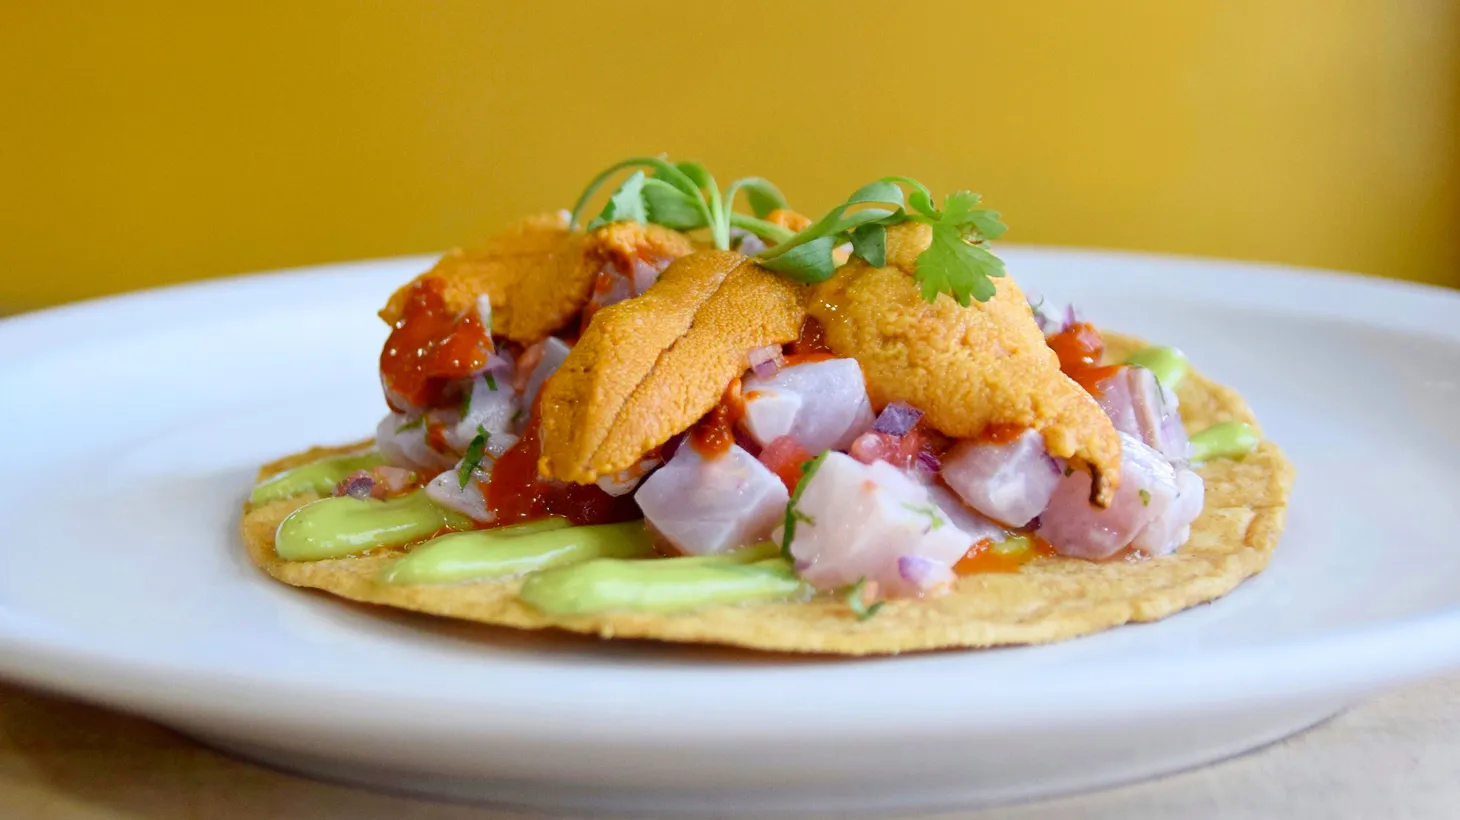 Holbox, located in Mercado La Paloma, serves traditional Yucatán food, including ceviches and agua chiles.